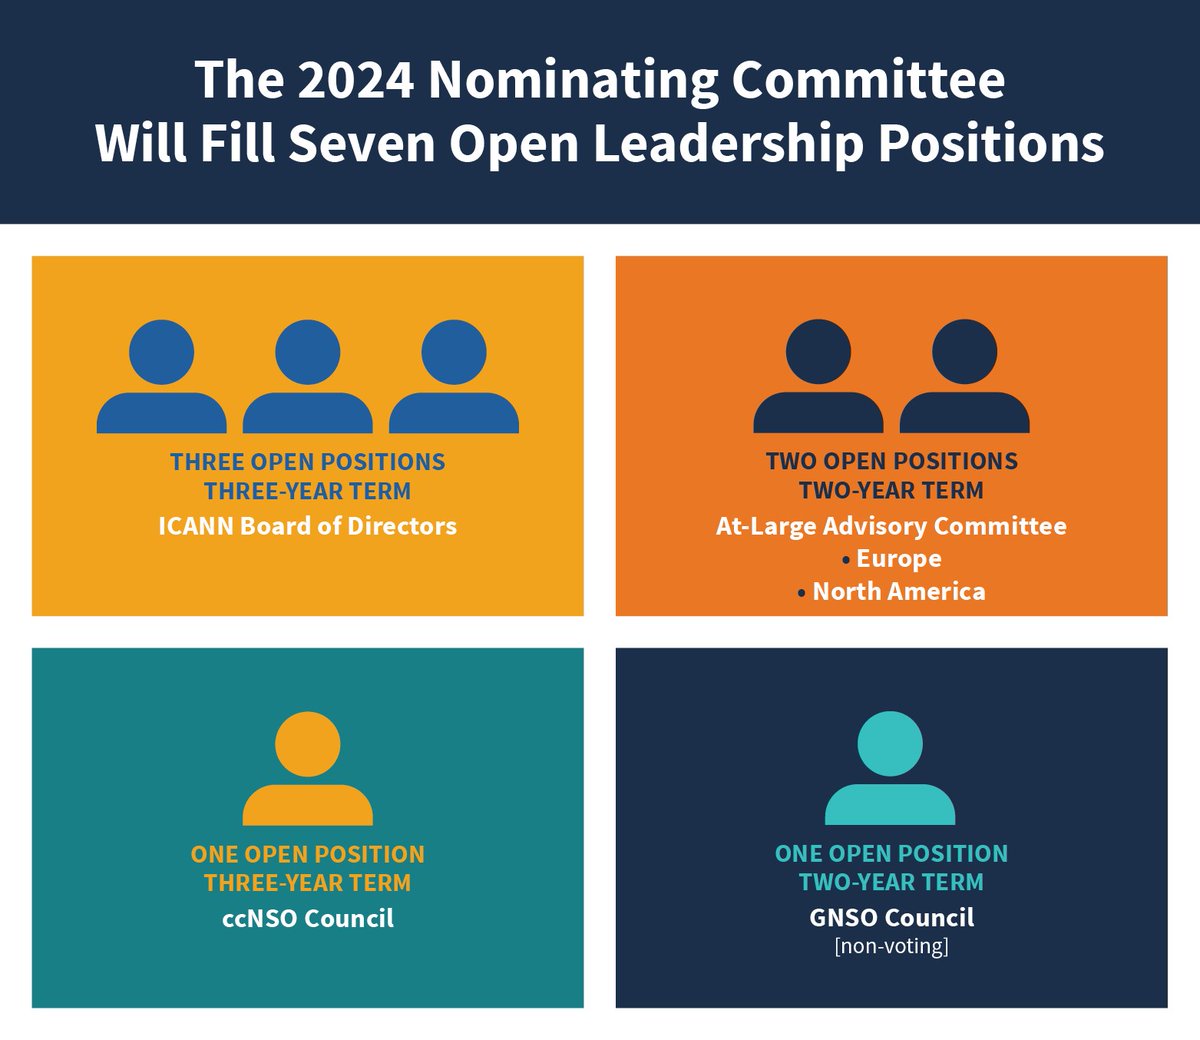 Don’t miss the opportunity to apply for an ICANN leadership position - applications close 15 March. Successful applicants will work to fulfil ICANN’s mission of helping to ensure an interoperable, stable, and secure internet. Read more here: icann.org/resources/page…